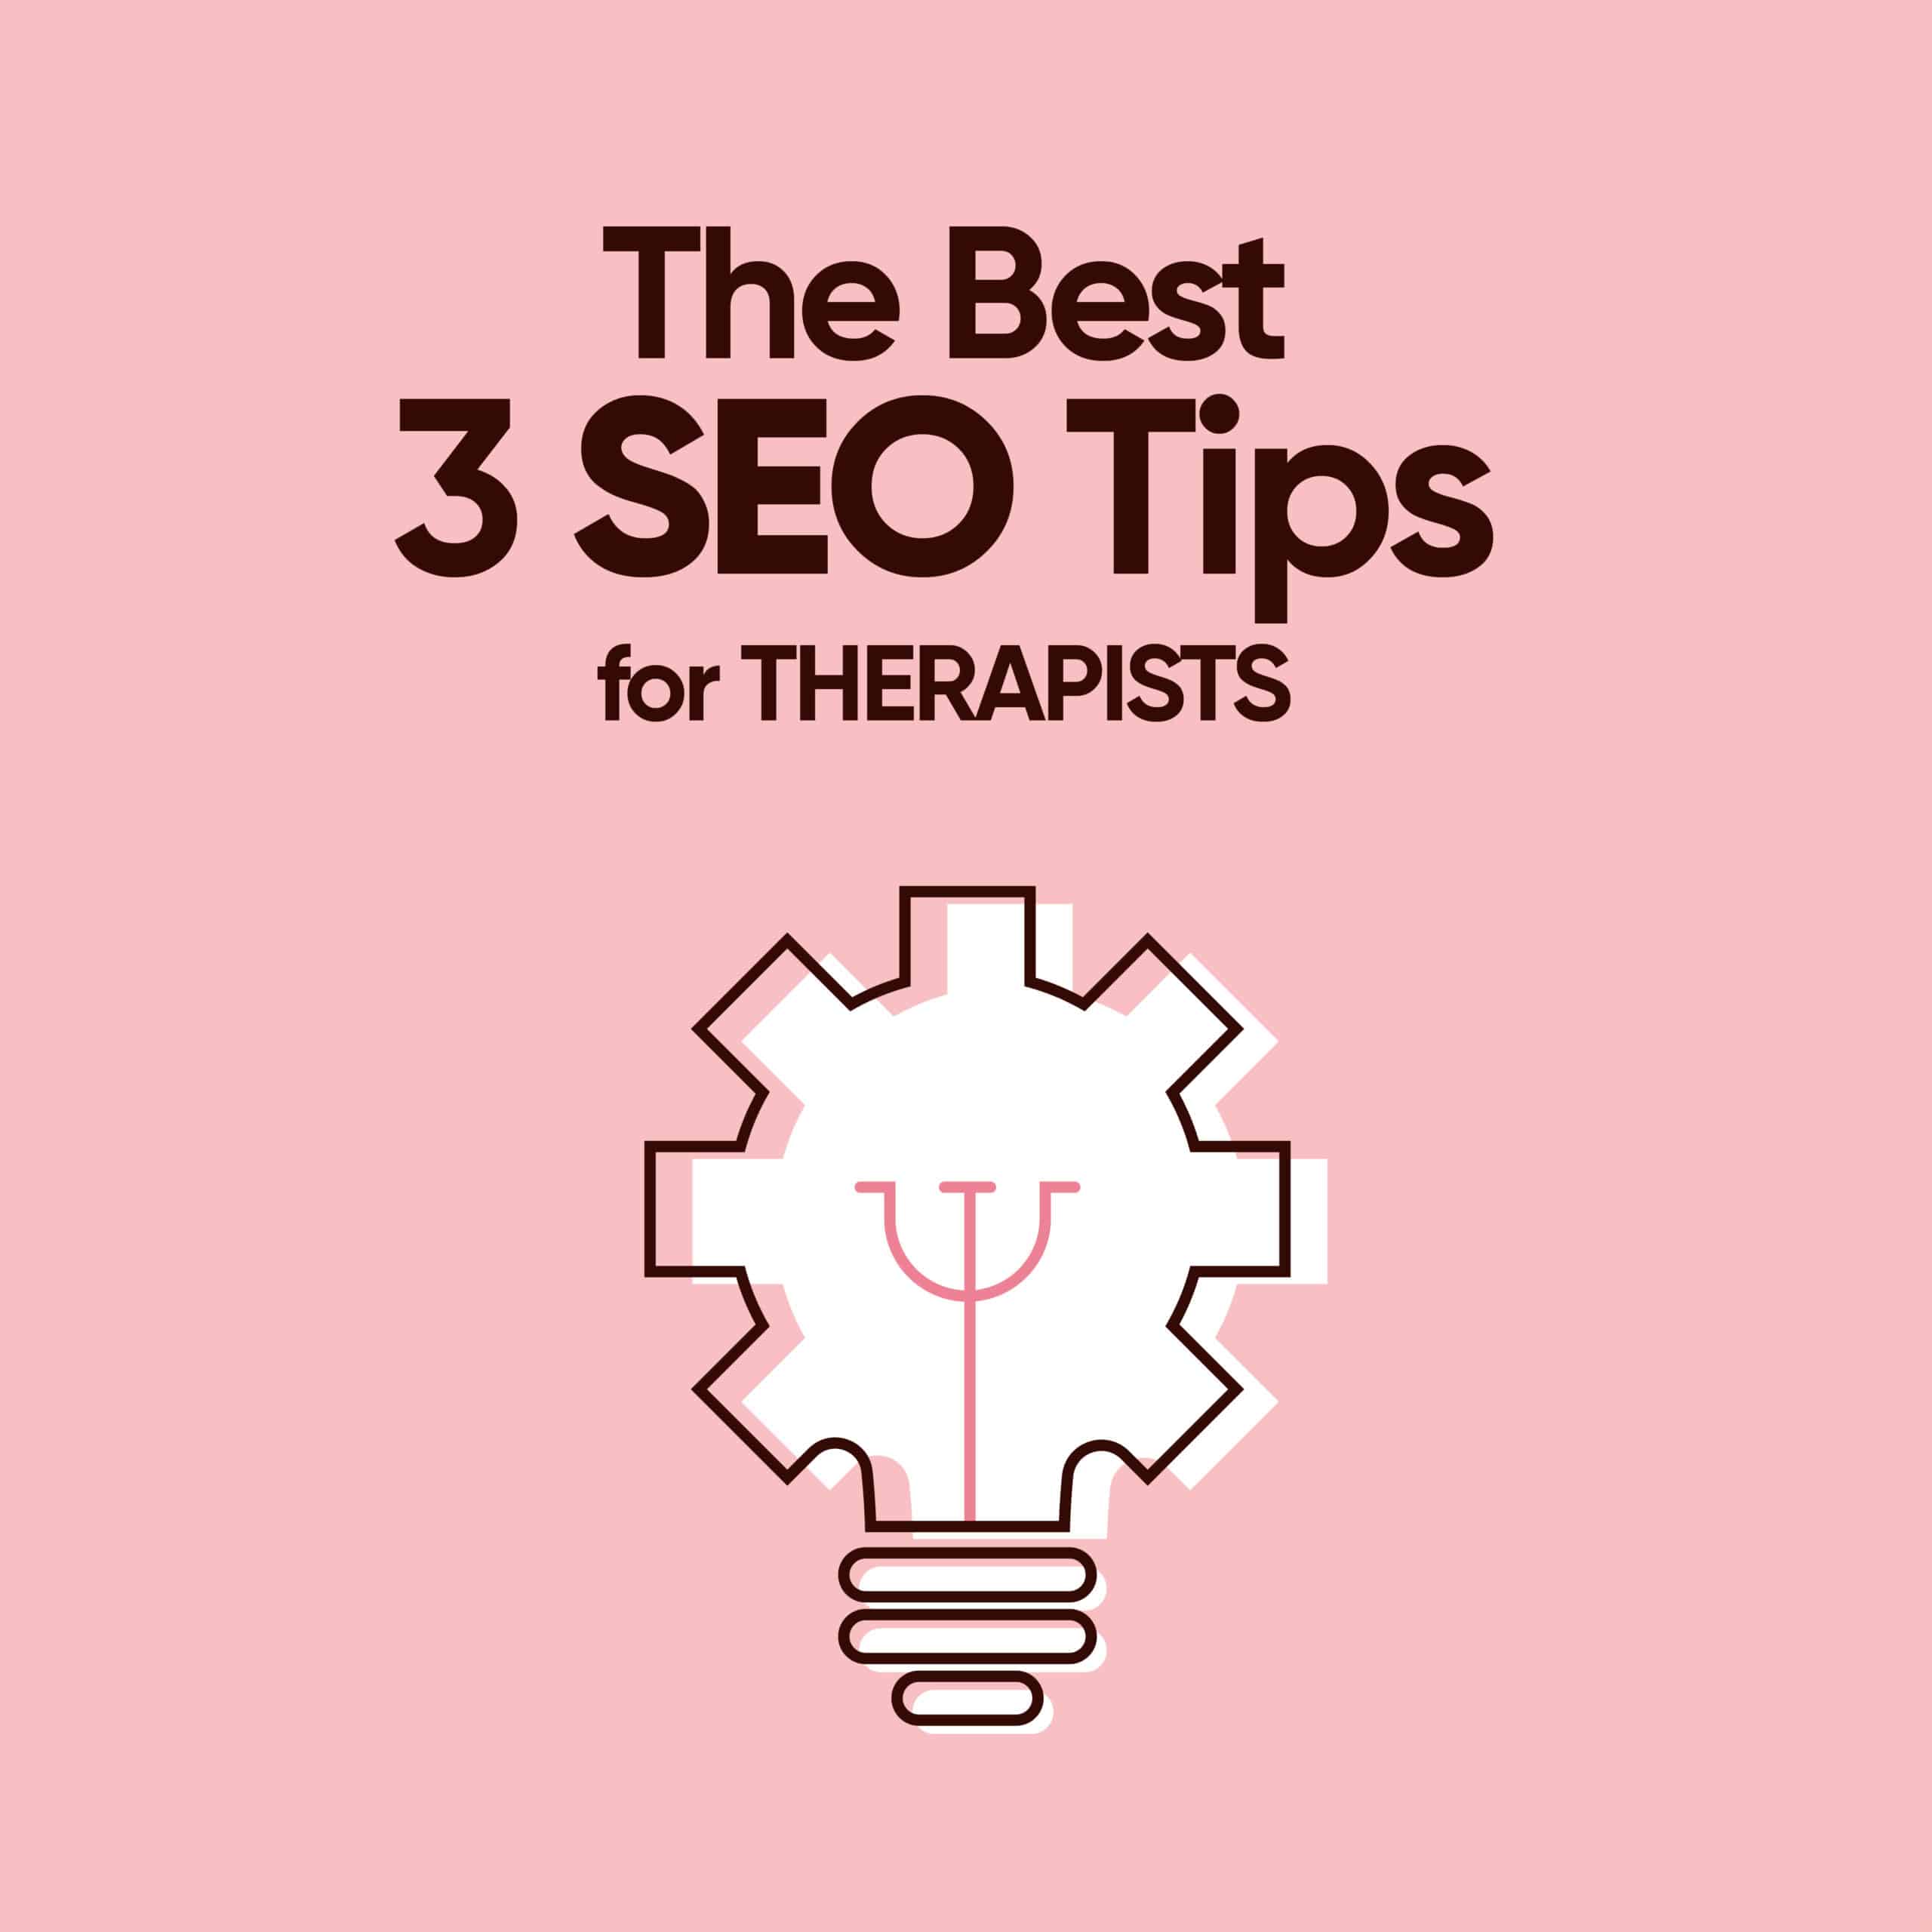 The Best 3 SEO Tips for Therapists